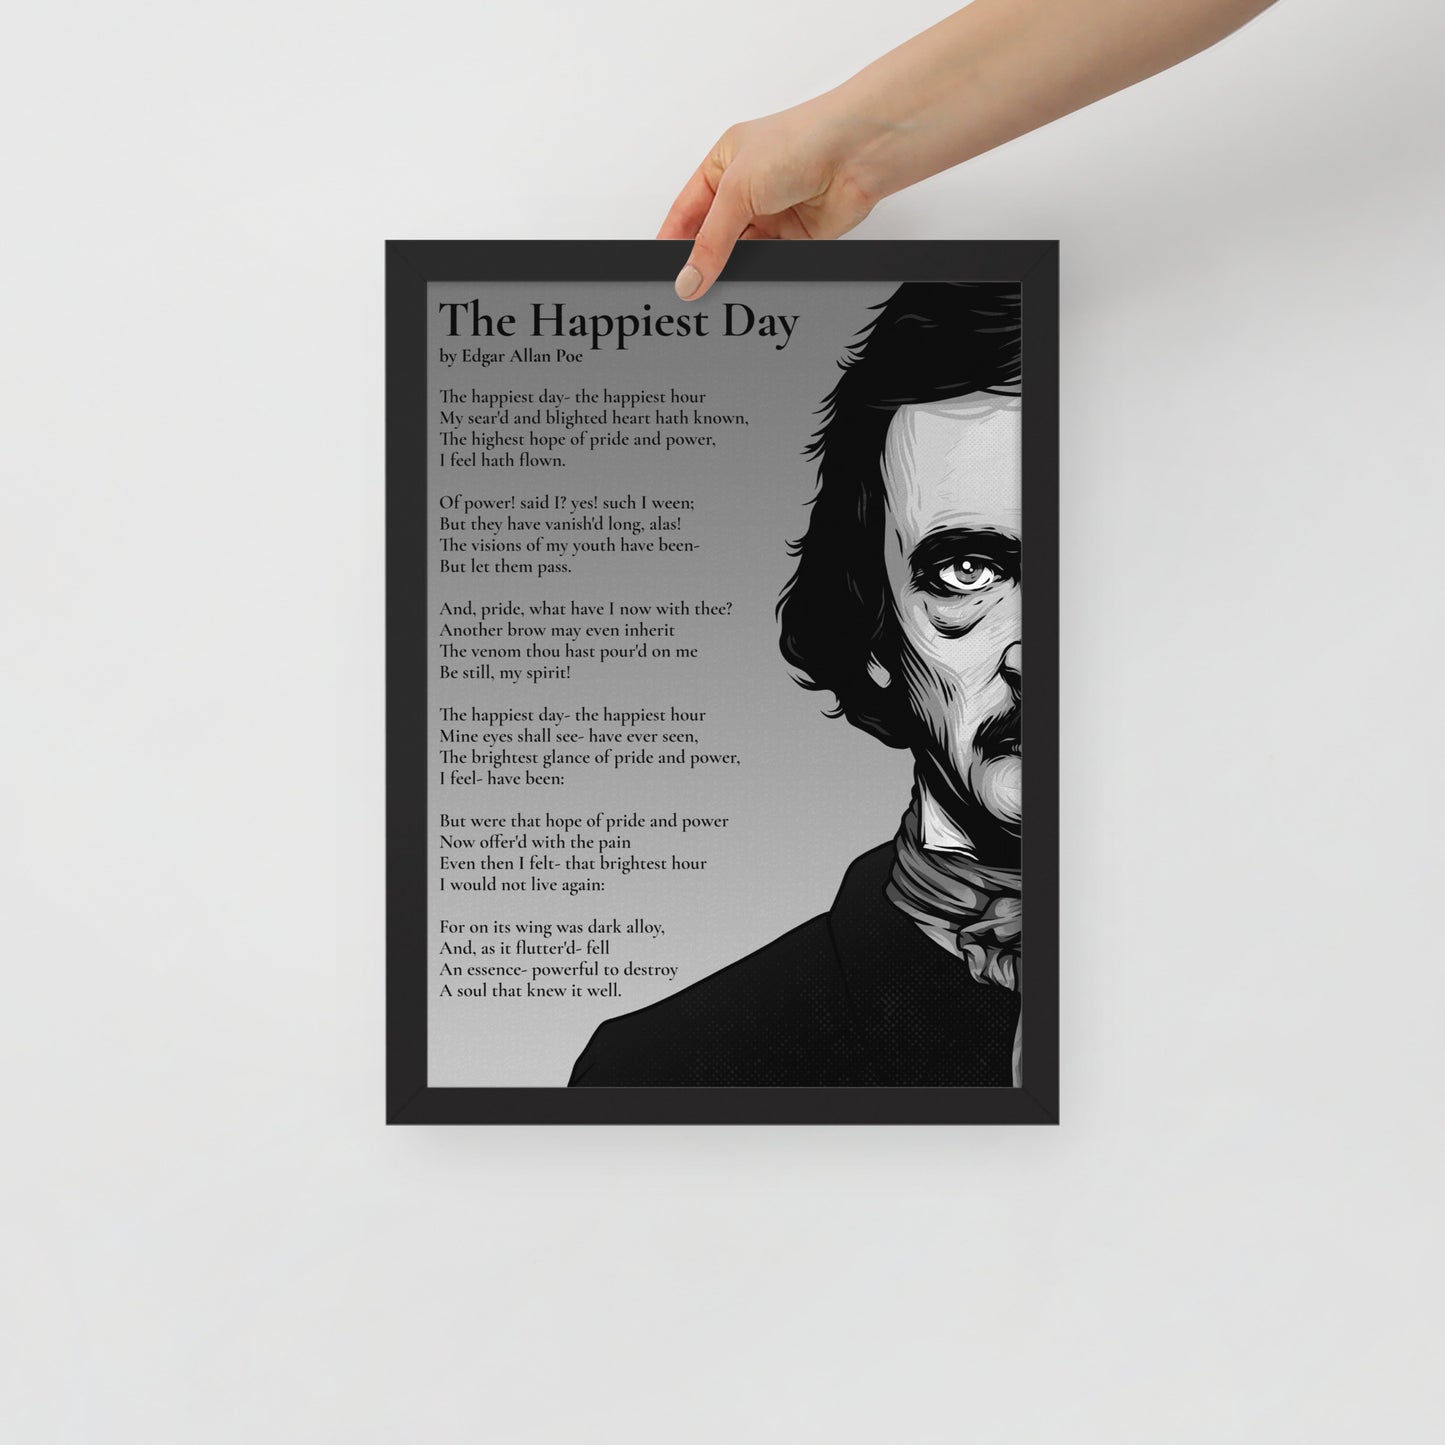 Edgar Allan Poe's 'The Happiest Day' Framed Matted Poster - 12 x 16 Black Frame